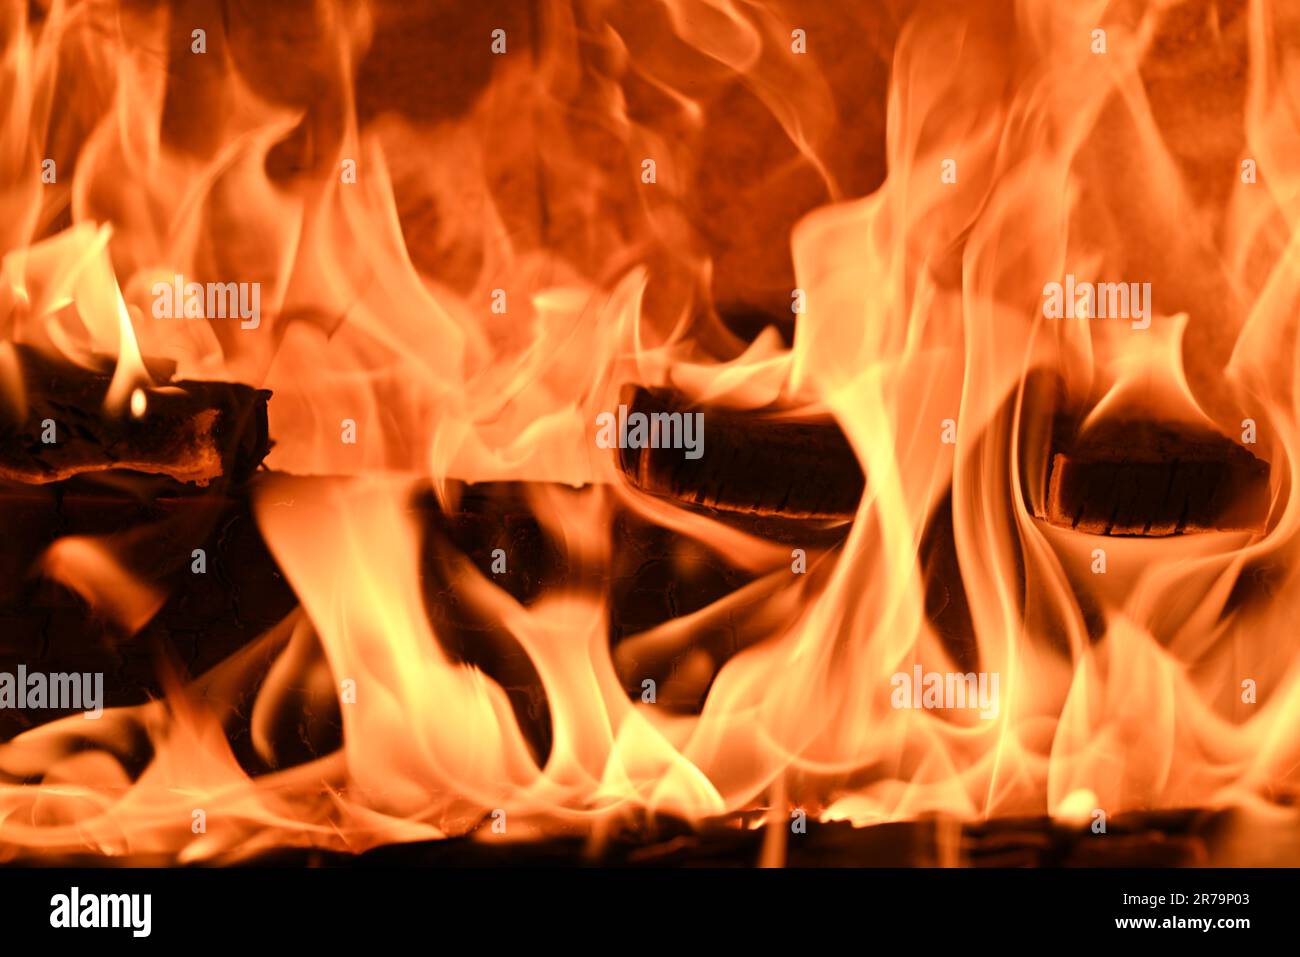 A cozy fireplace with a crackling fire blazing away in the center Stock Photo